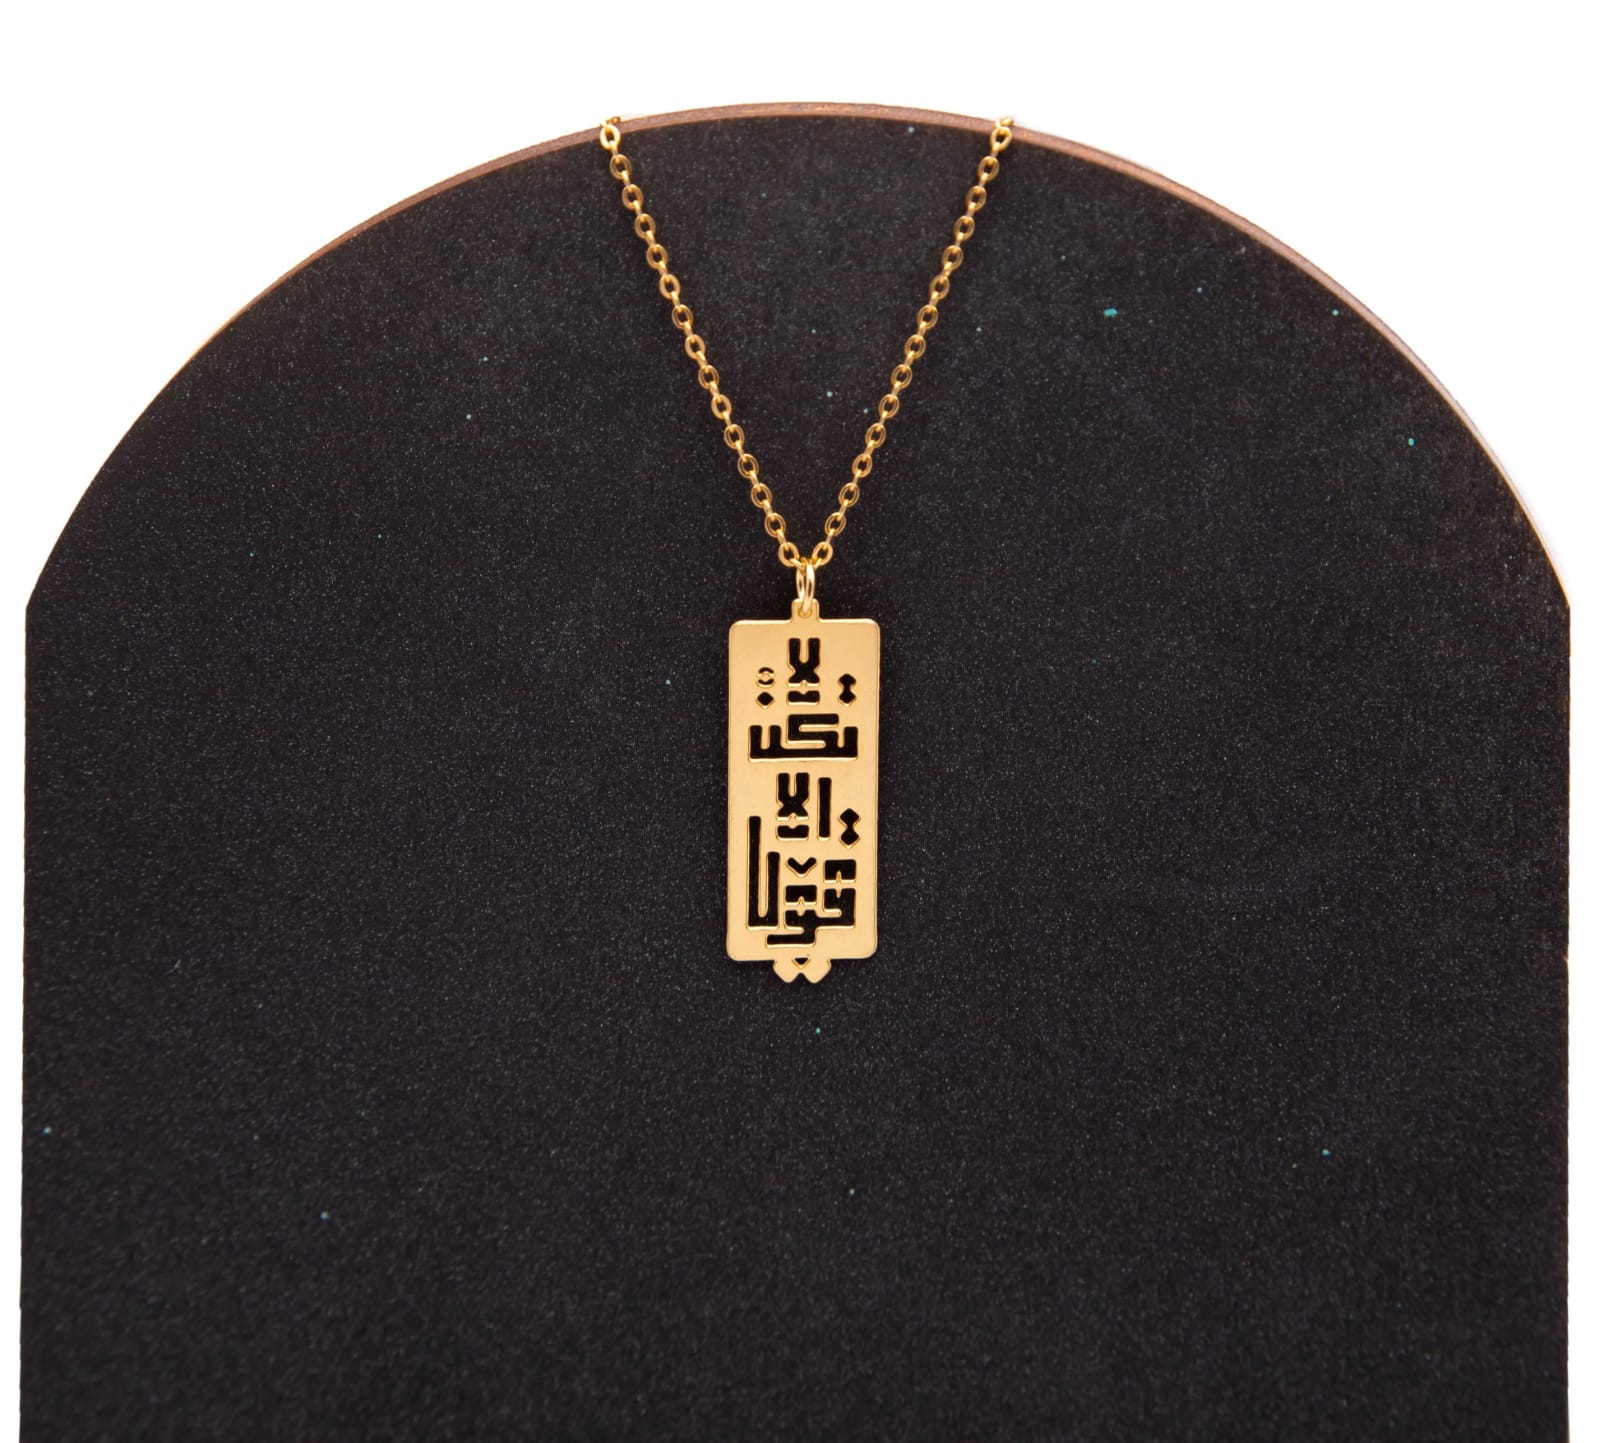 "Be strong" Calligraphy Necklace - Hilweh Market